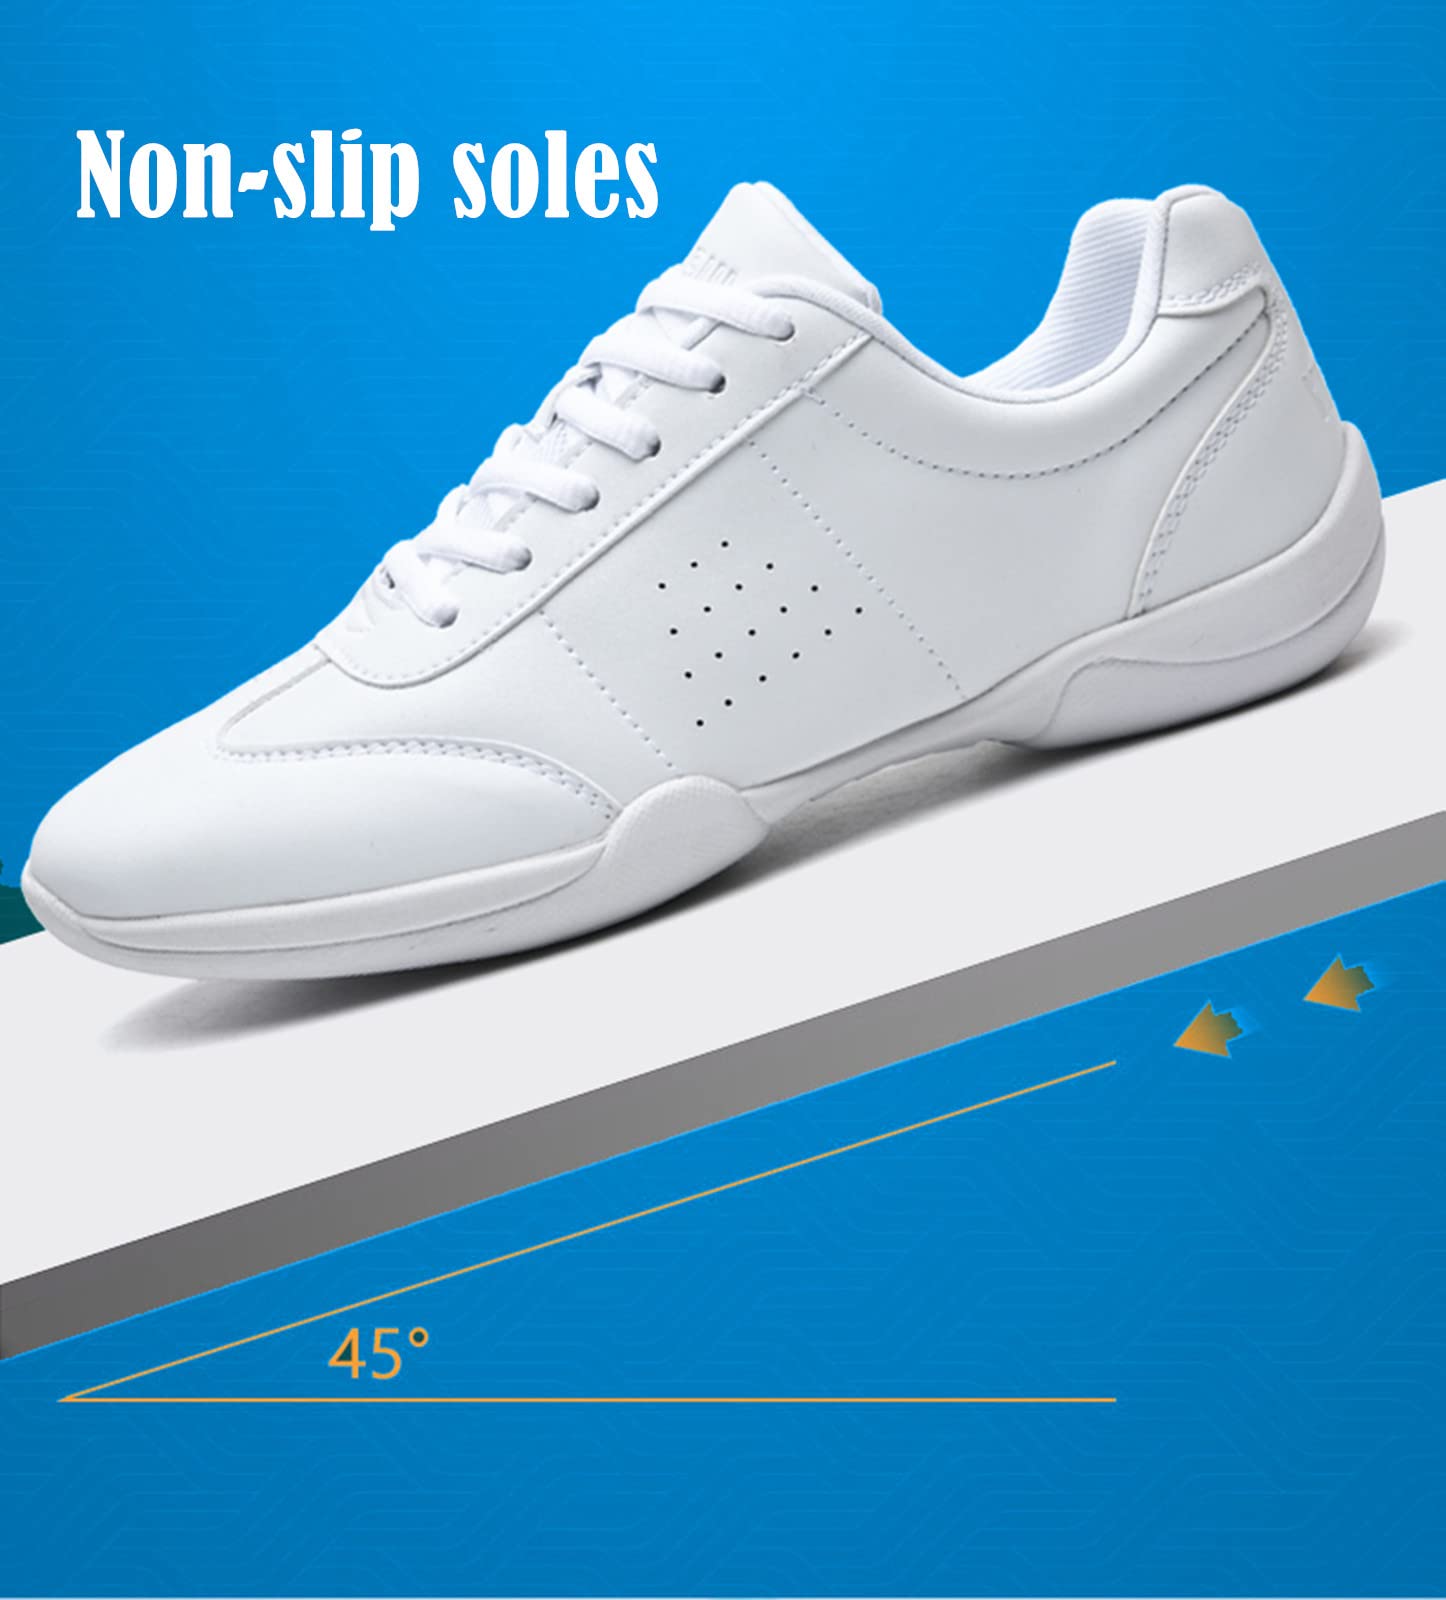 kkdom Adult & Youth White Cheerleading Shoe Athletic Dance Shoes Tennis Sneakers Sport Training Cheer Shoes White US Size 4.5/EU Size 35